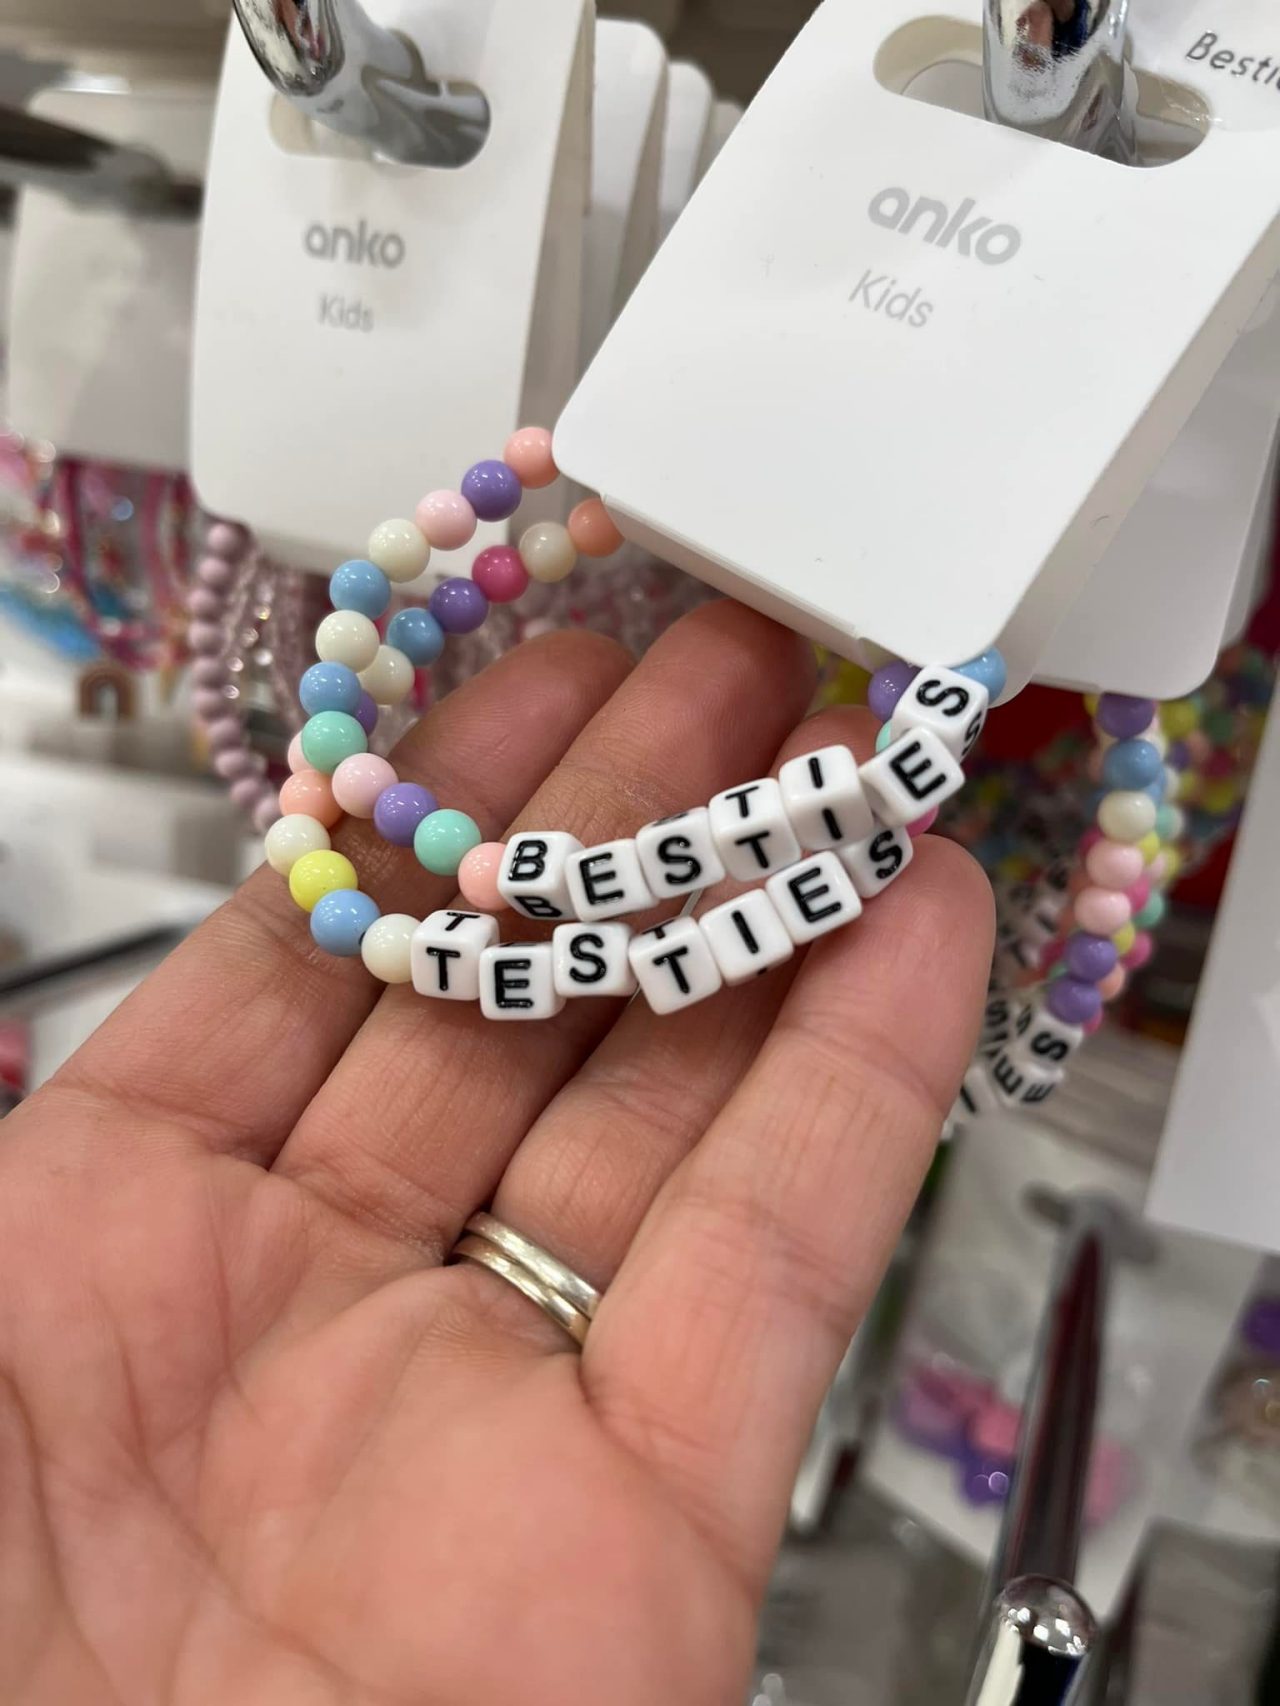 Hilarious Kmart bracelet typo leaves people in stitches 